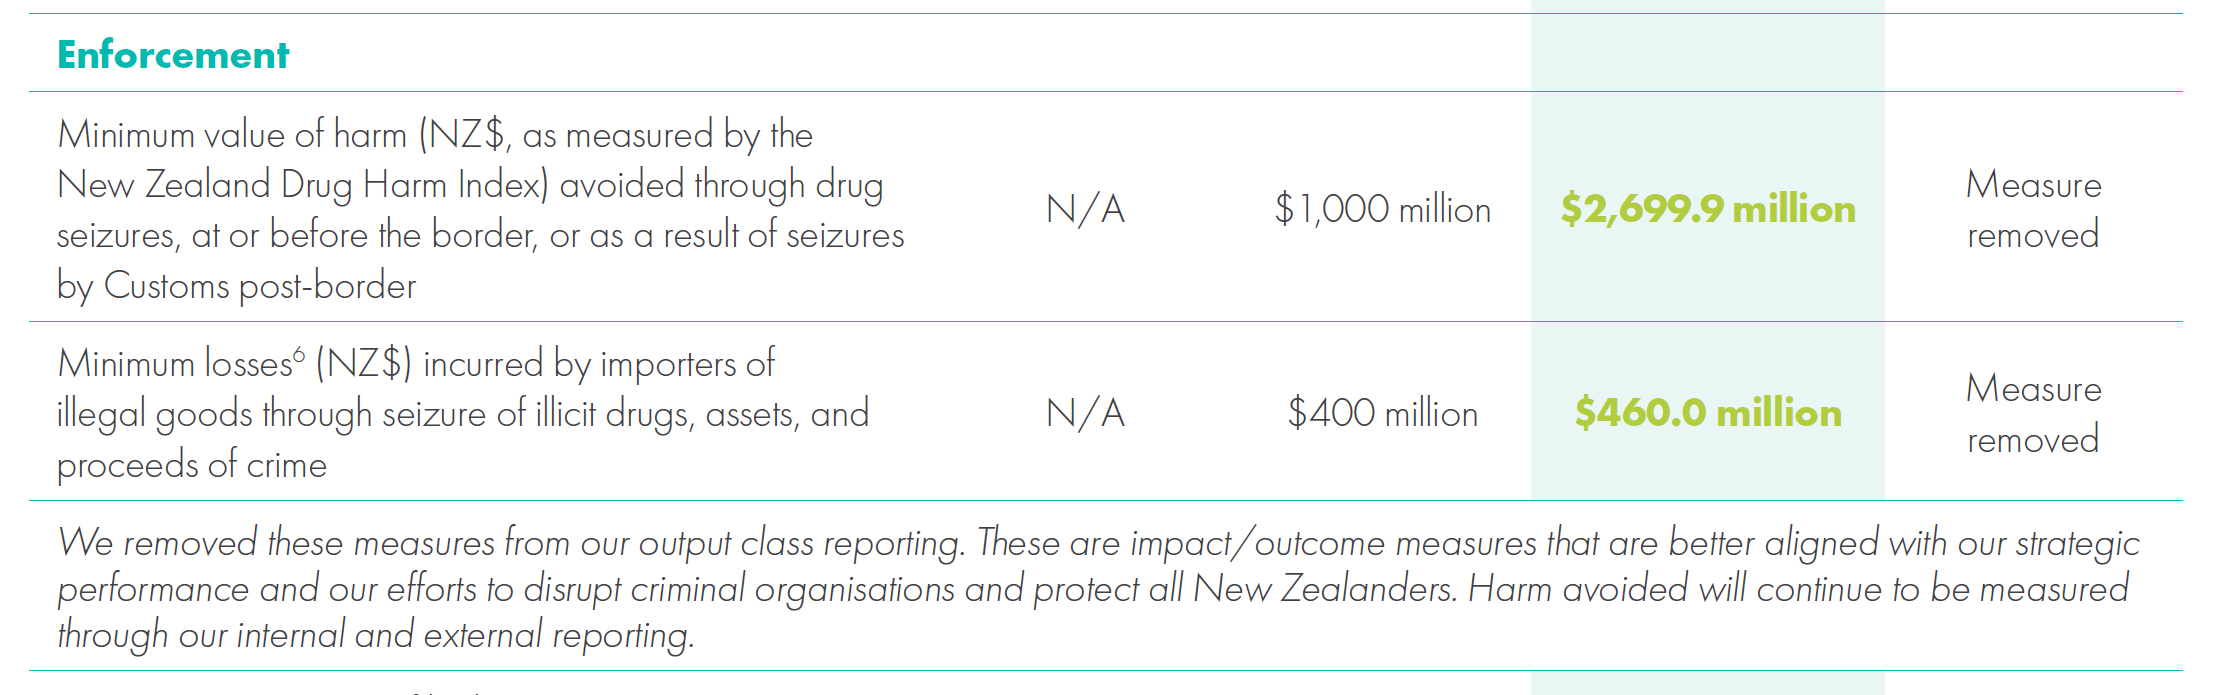 Image from New Zealand Customs Service’s 2020/21 Annual Report that describes two measures that have been removed and why.